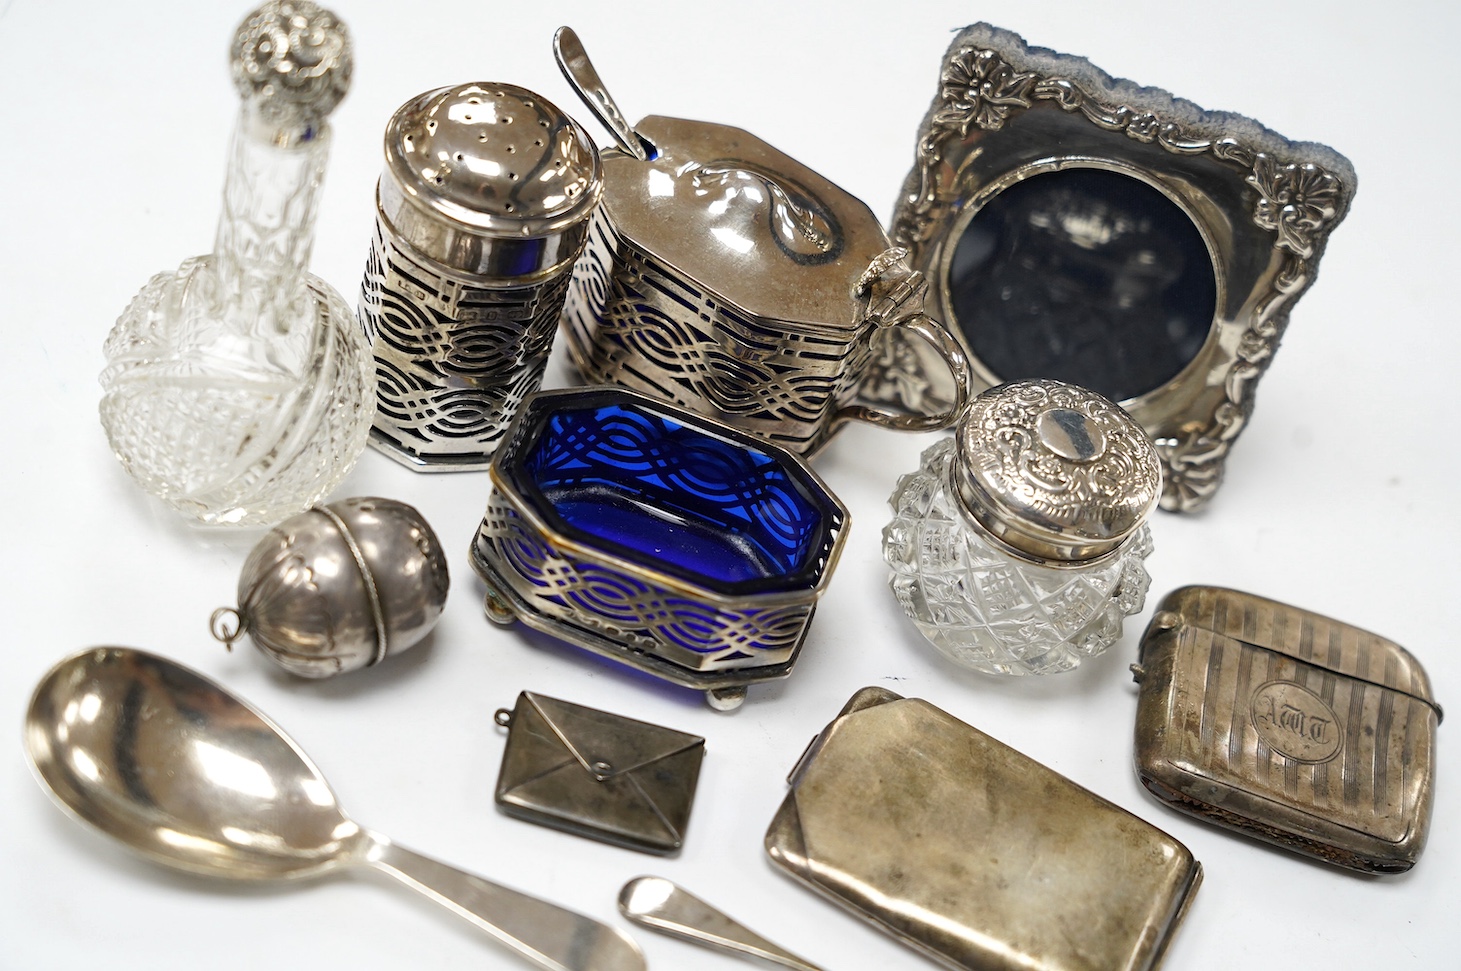 Sundry small silver etc., including condiments, toilet jars, vesta case, sterling envelope stamp case, plated match sleeve and silver caddy spoon. Condition - poor to fair